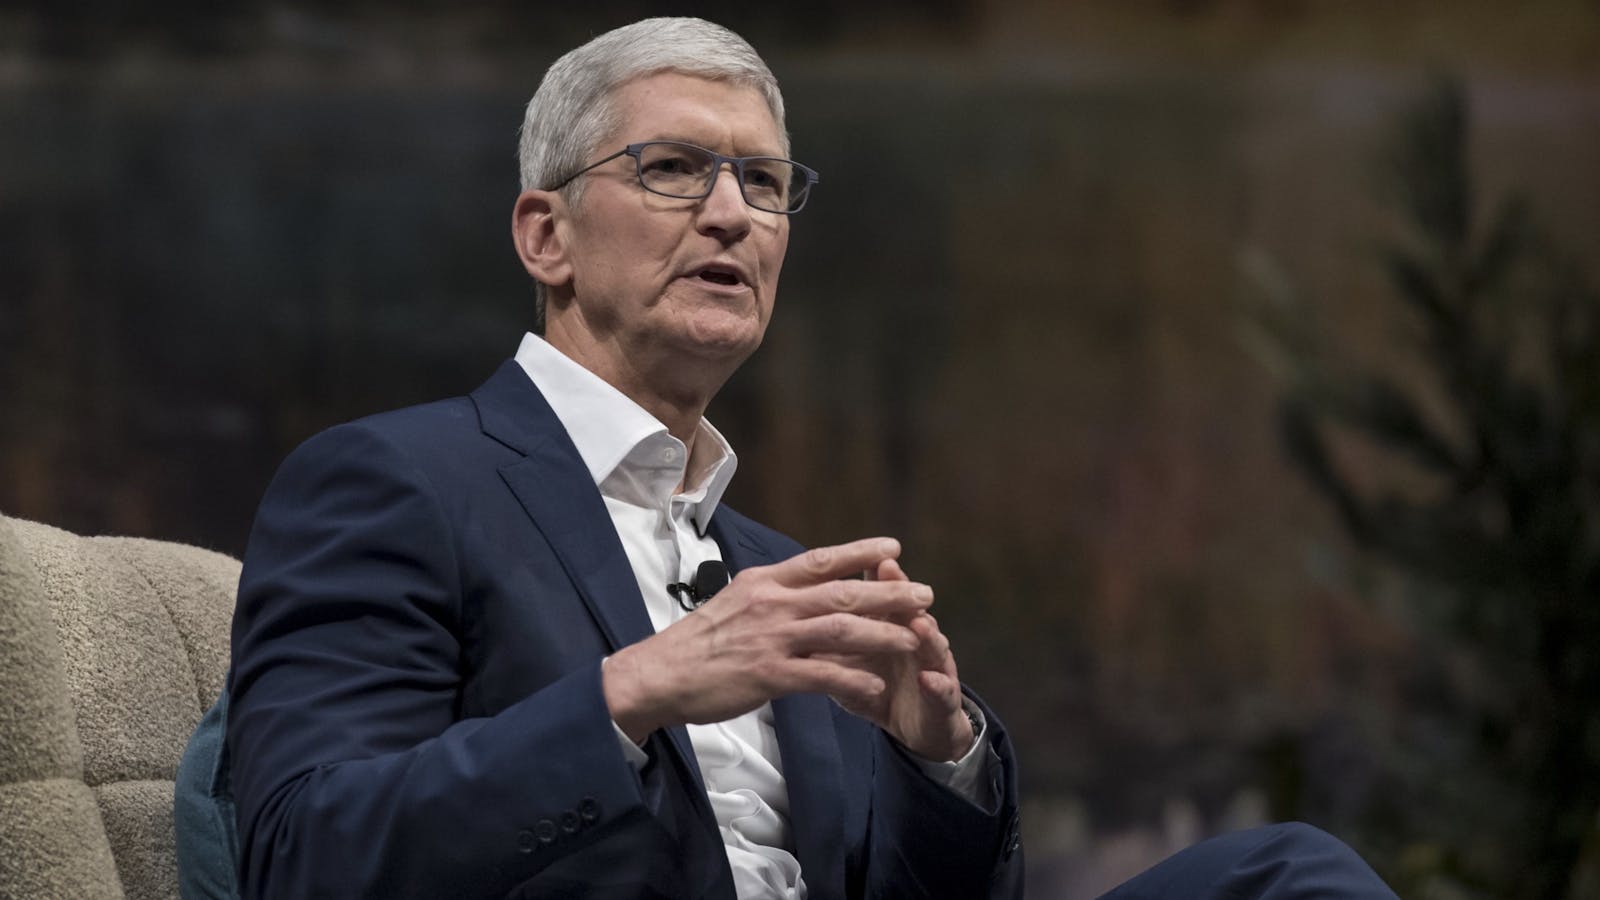 Apple CEO Tim Cook. Photo by Bloomberg